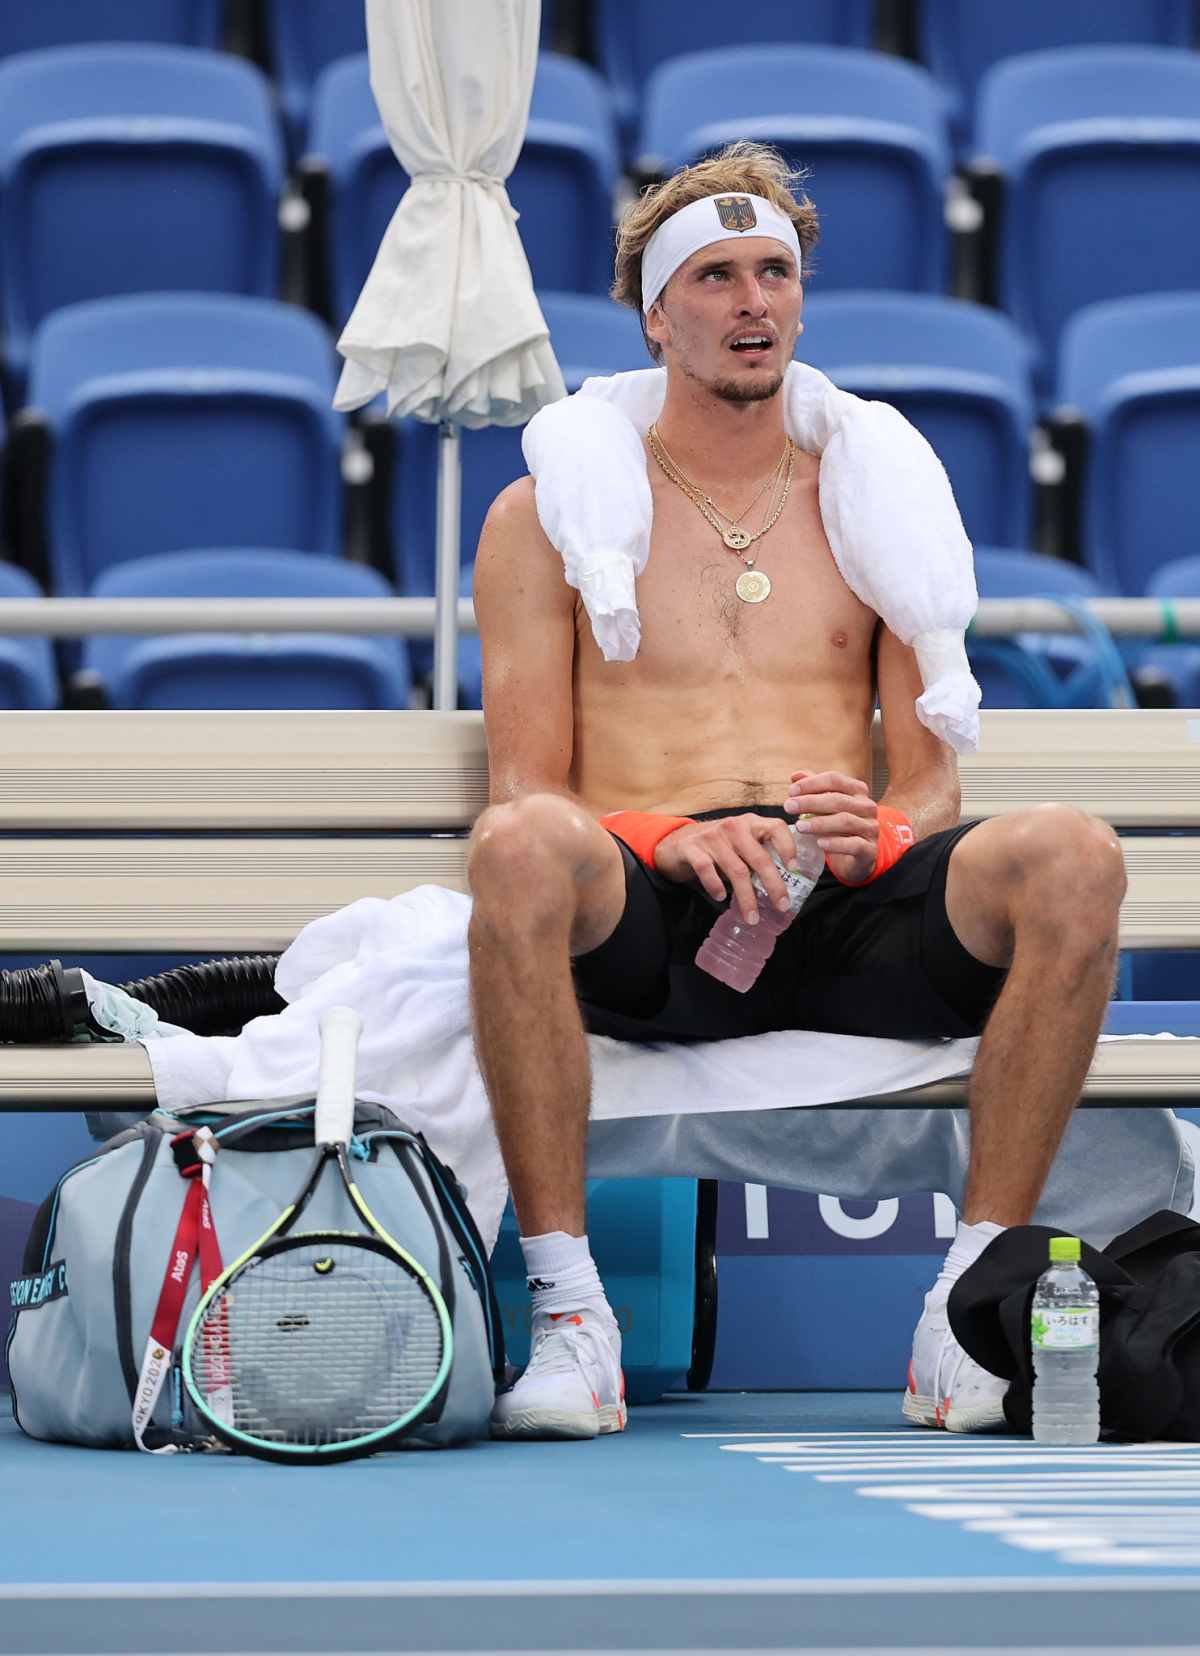 Alexander Zverev, seated and shirtless, has an ice pack draped around his shoulders.